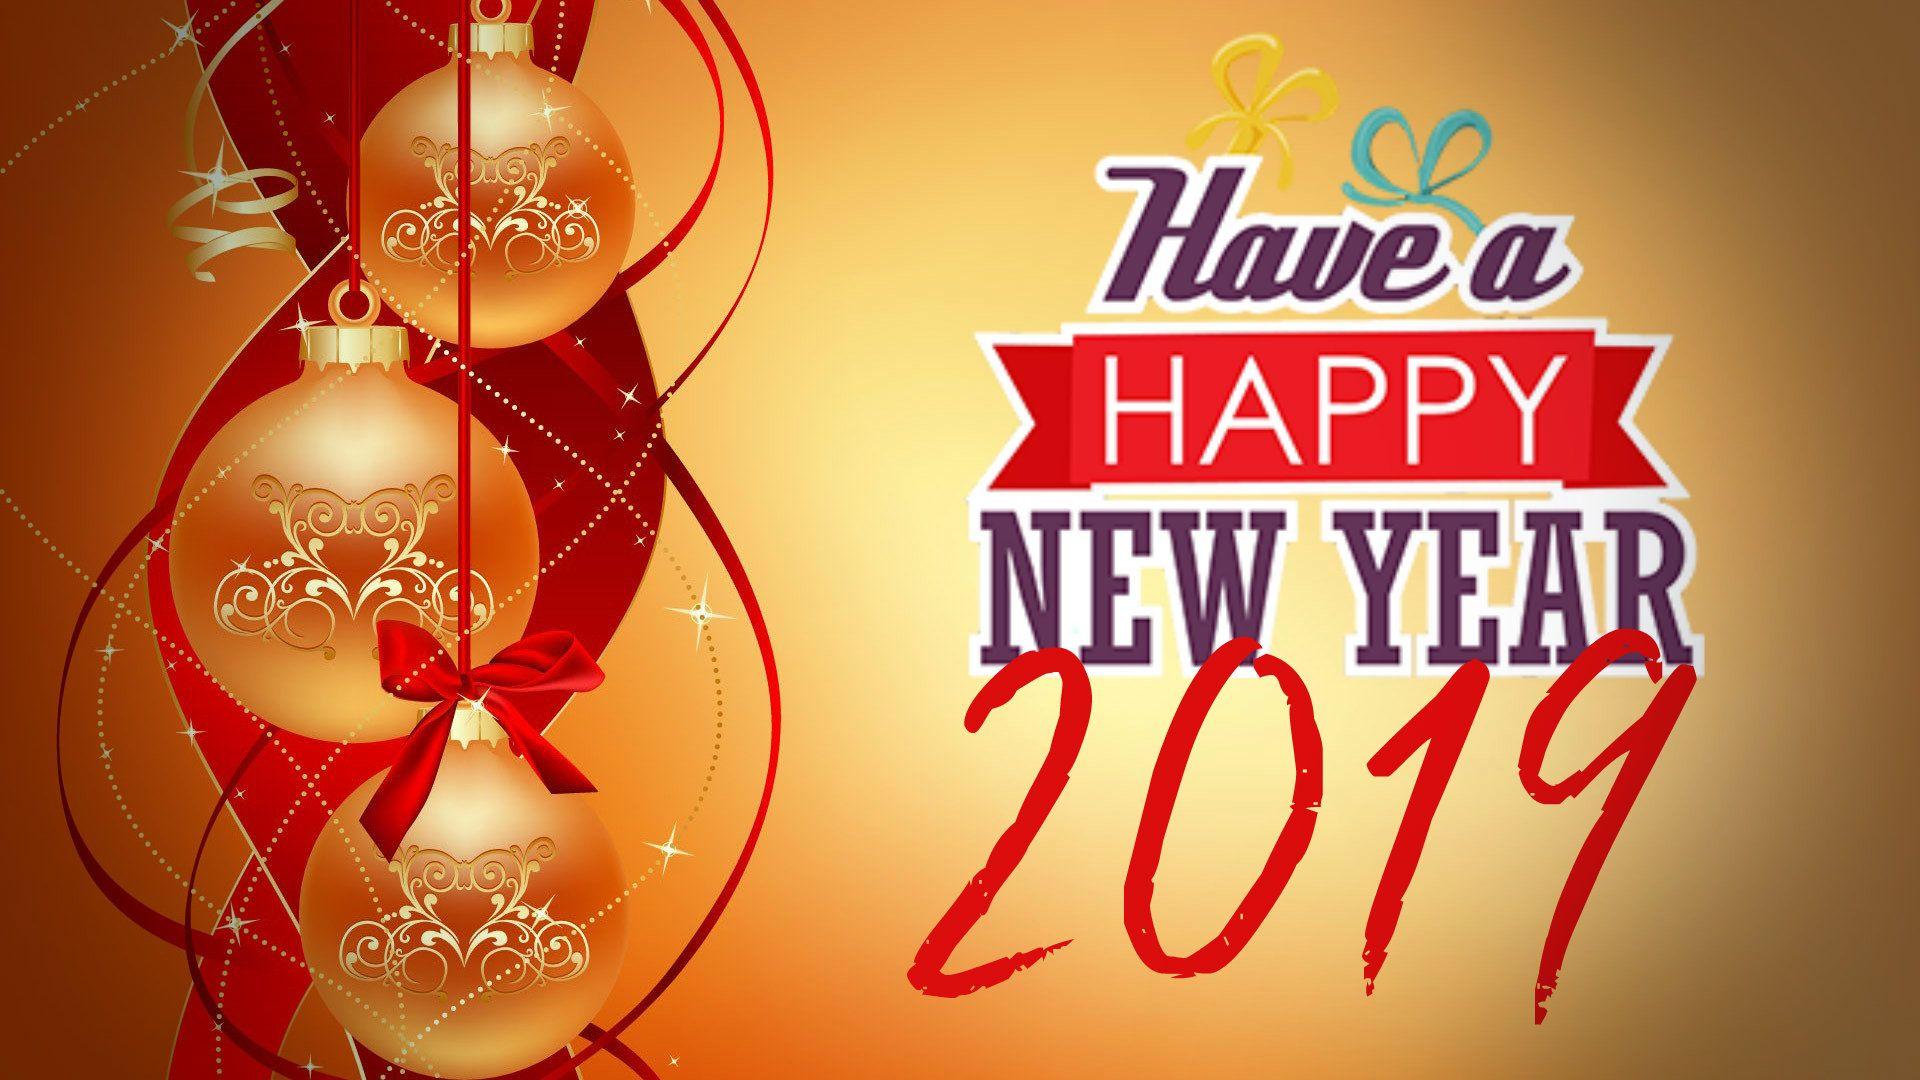 290 New Year 2019 HD Wallpapers and Backgrounds